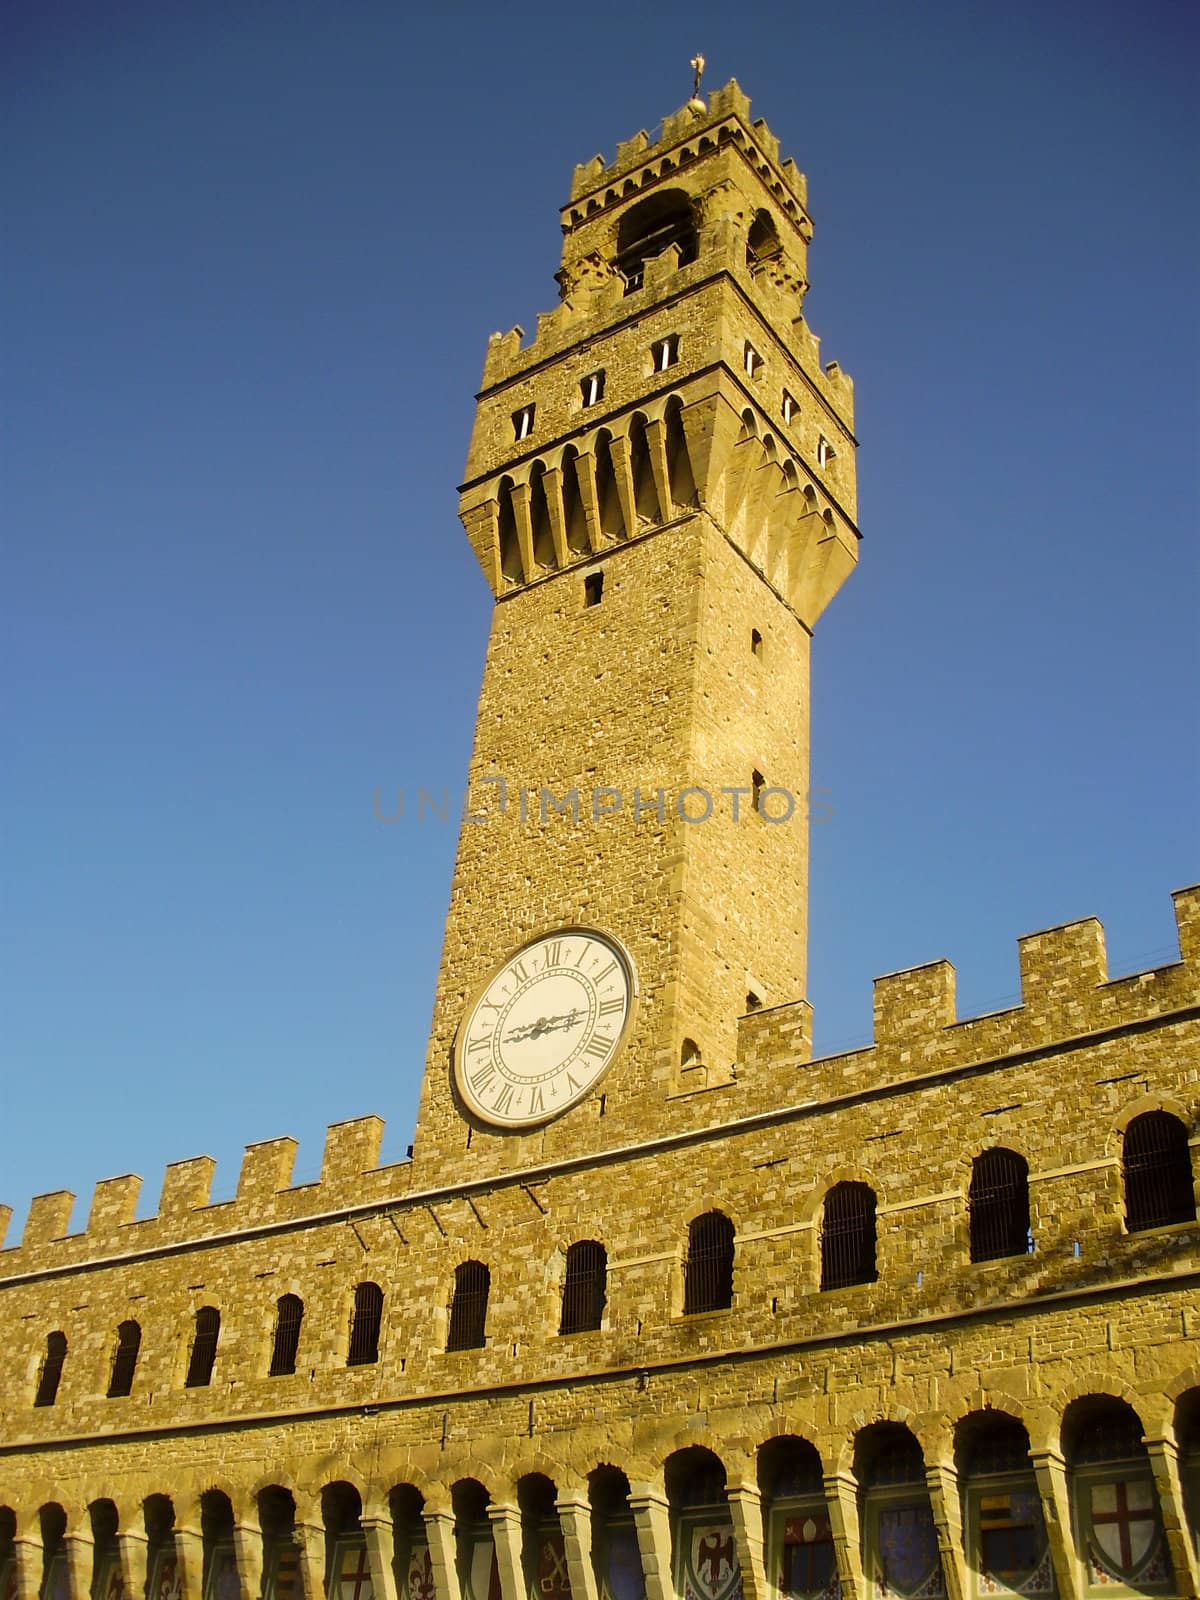 The Palazzo Vecchio in Florence, Italy.